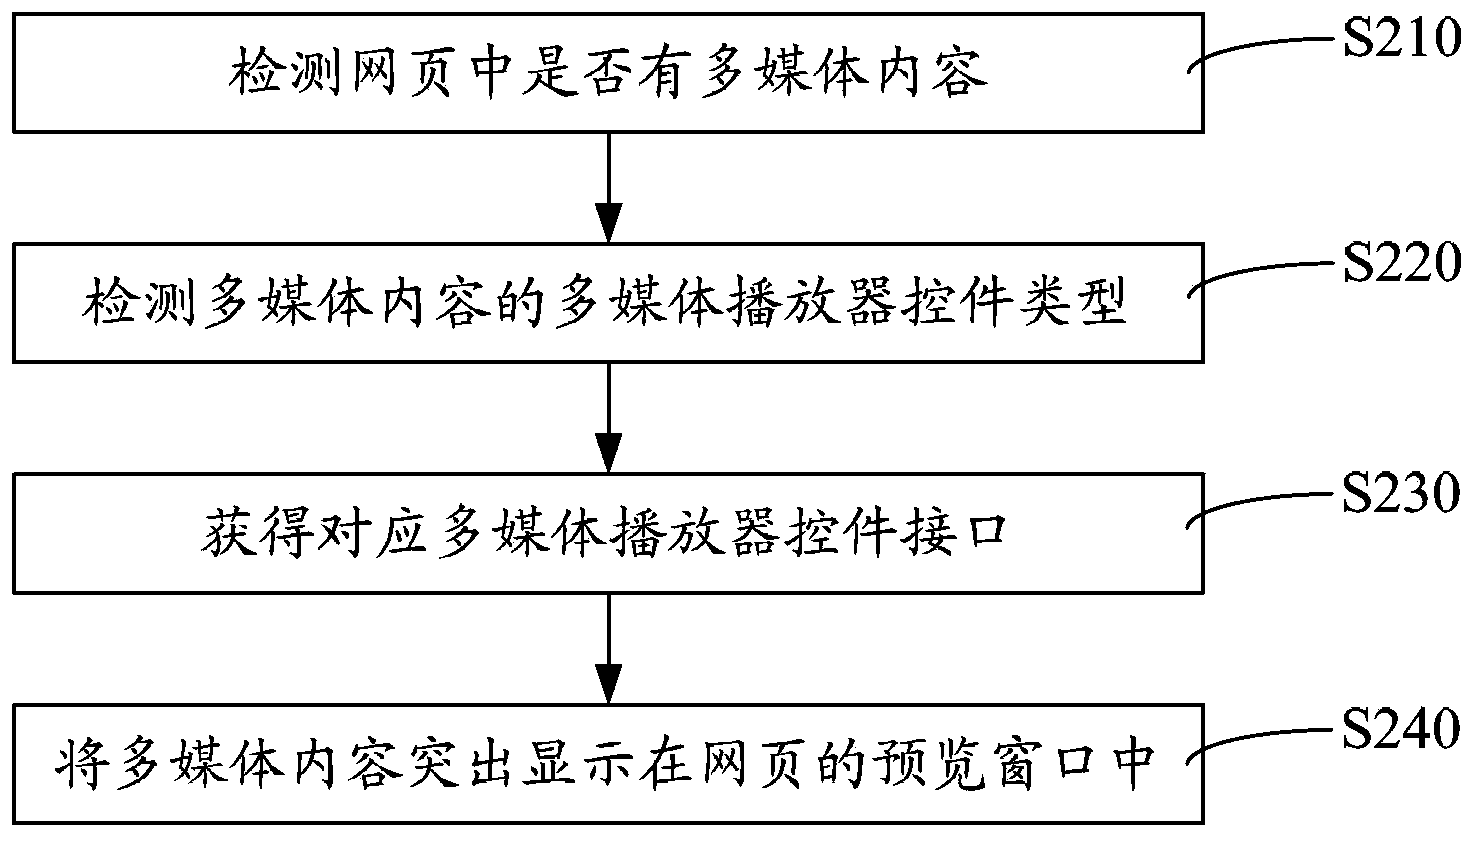 Web page content displaying method and system